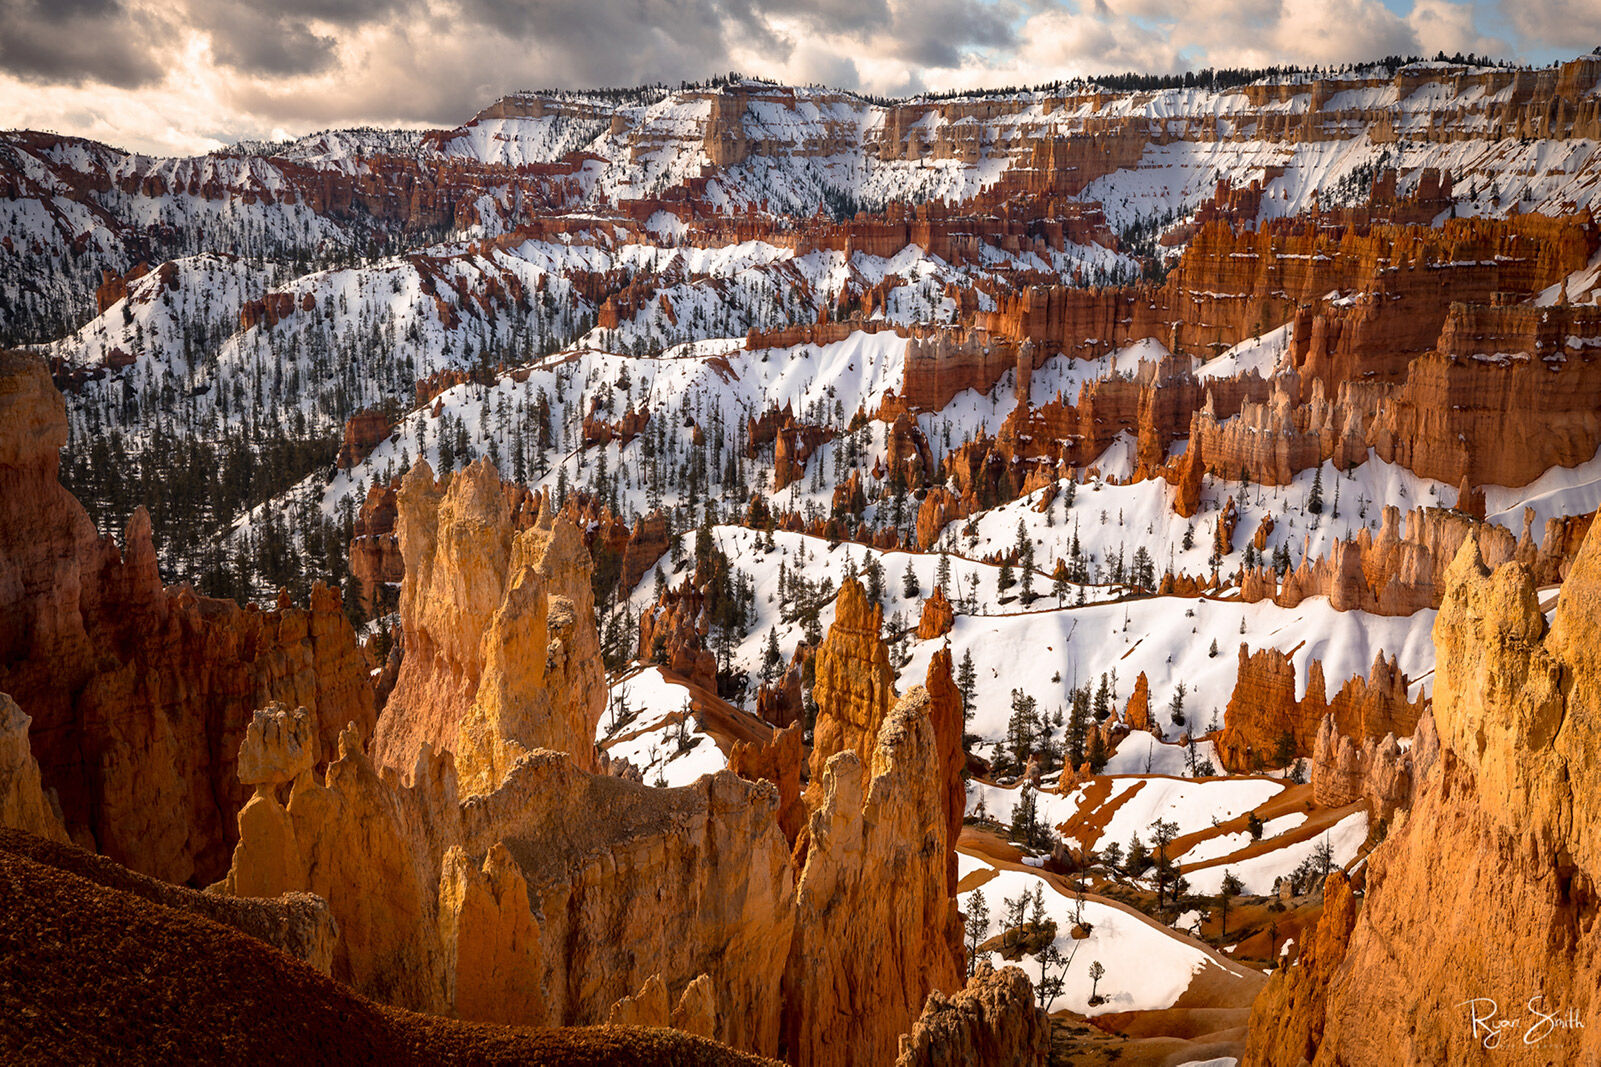 A canyon filled with red hoodoos, or rock spires, is seen with snow over the landscape and some trees in the canyon and the sky filled with fluffy clouds.